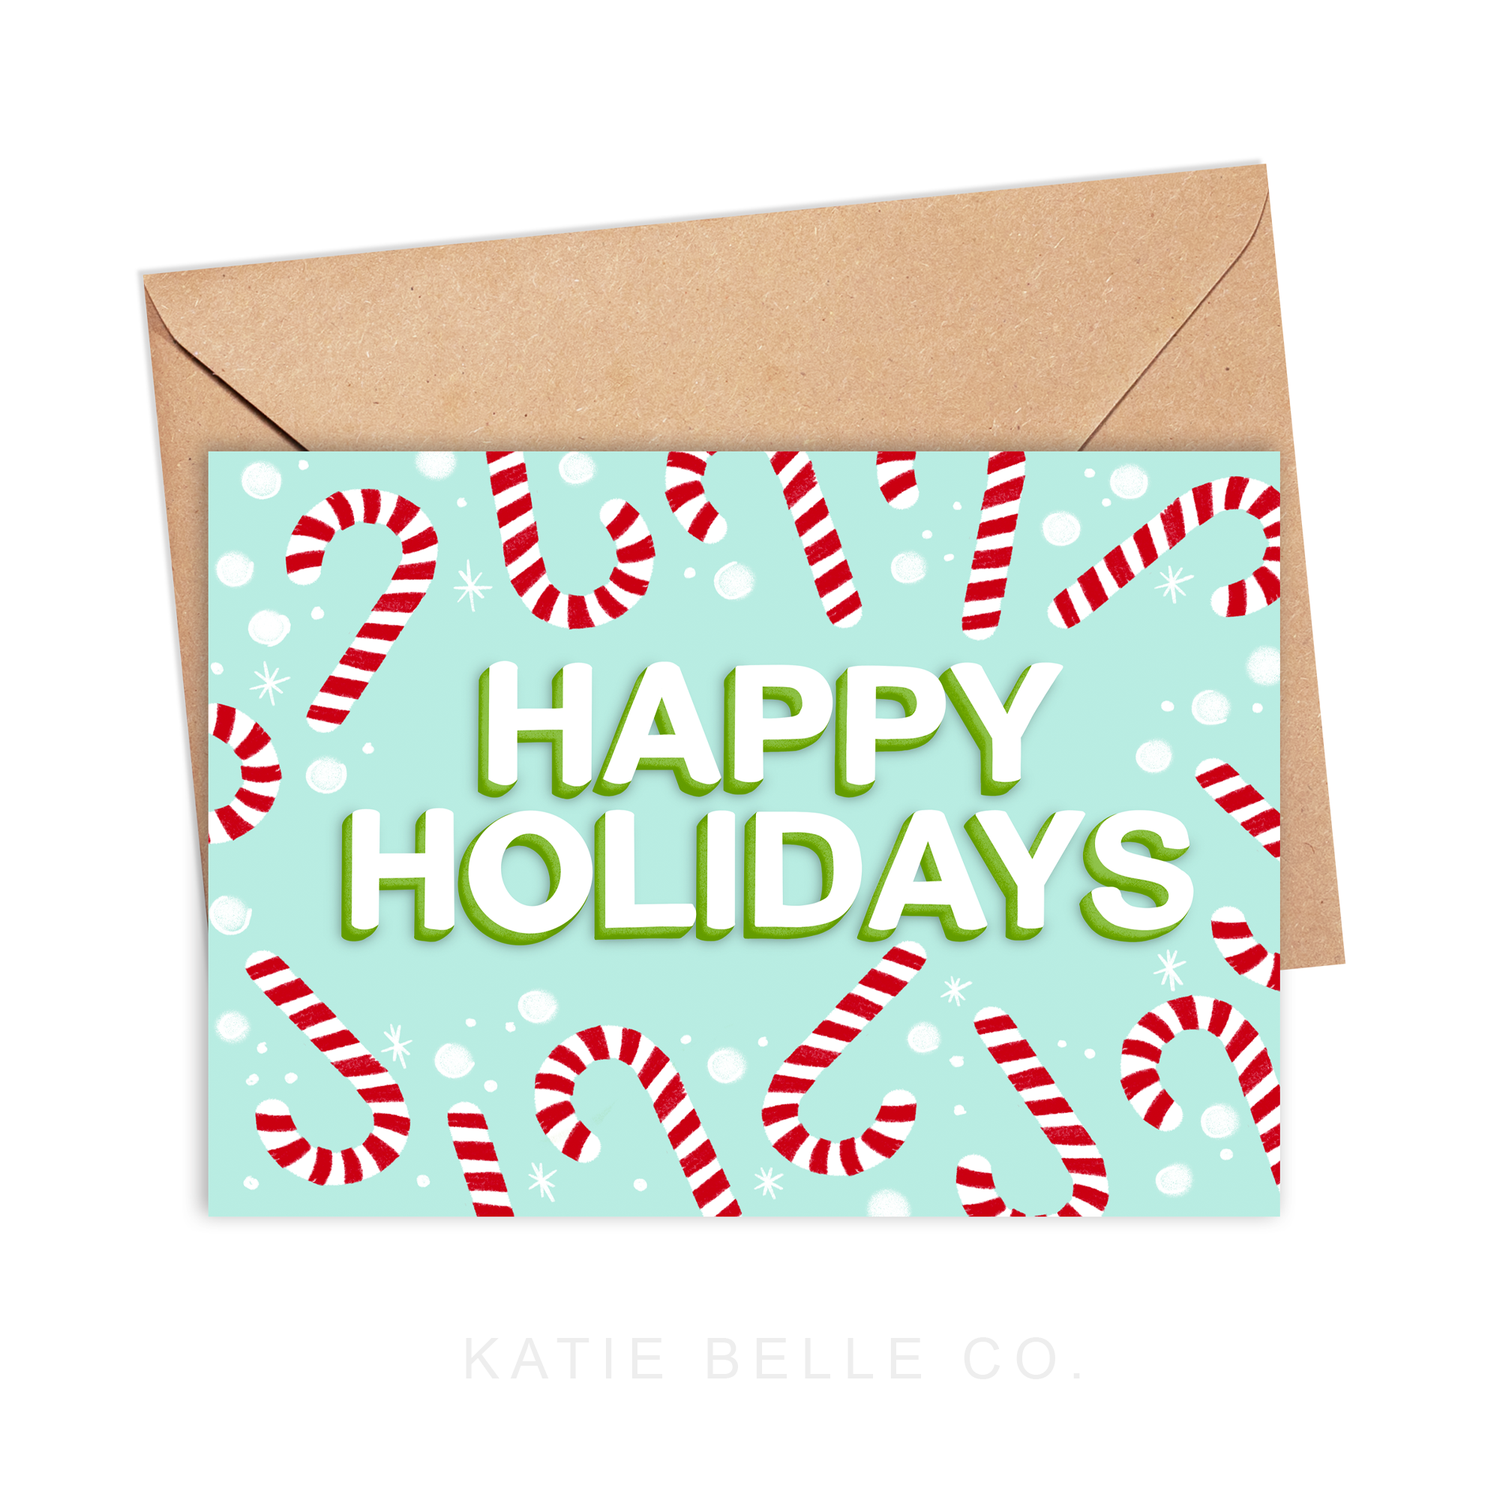 happy holidays. greeting card. christmas greeting card. holidays greeting card. candy cane card. candy canes. A2 size card. horizontal greeting card. hand drawn. red and white stripes. White block lettering. Snowflakes accents. Made by Katie Belle Co. 